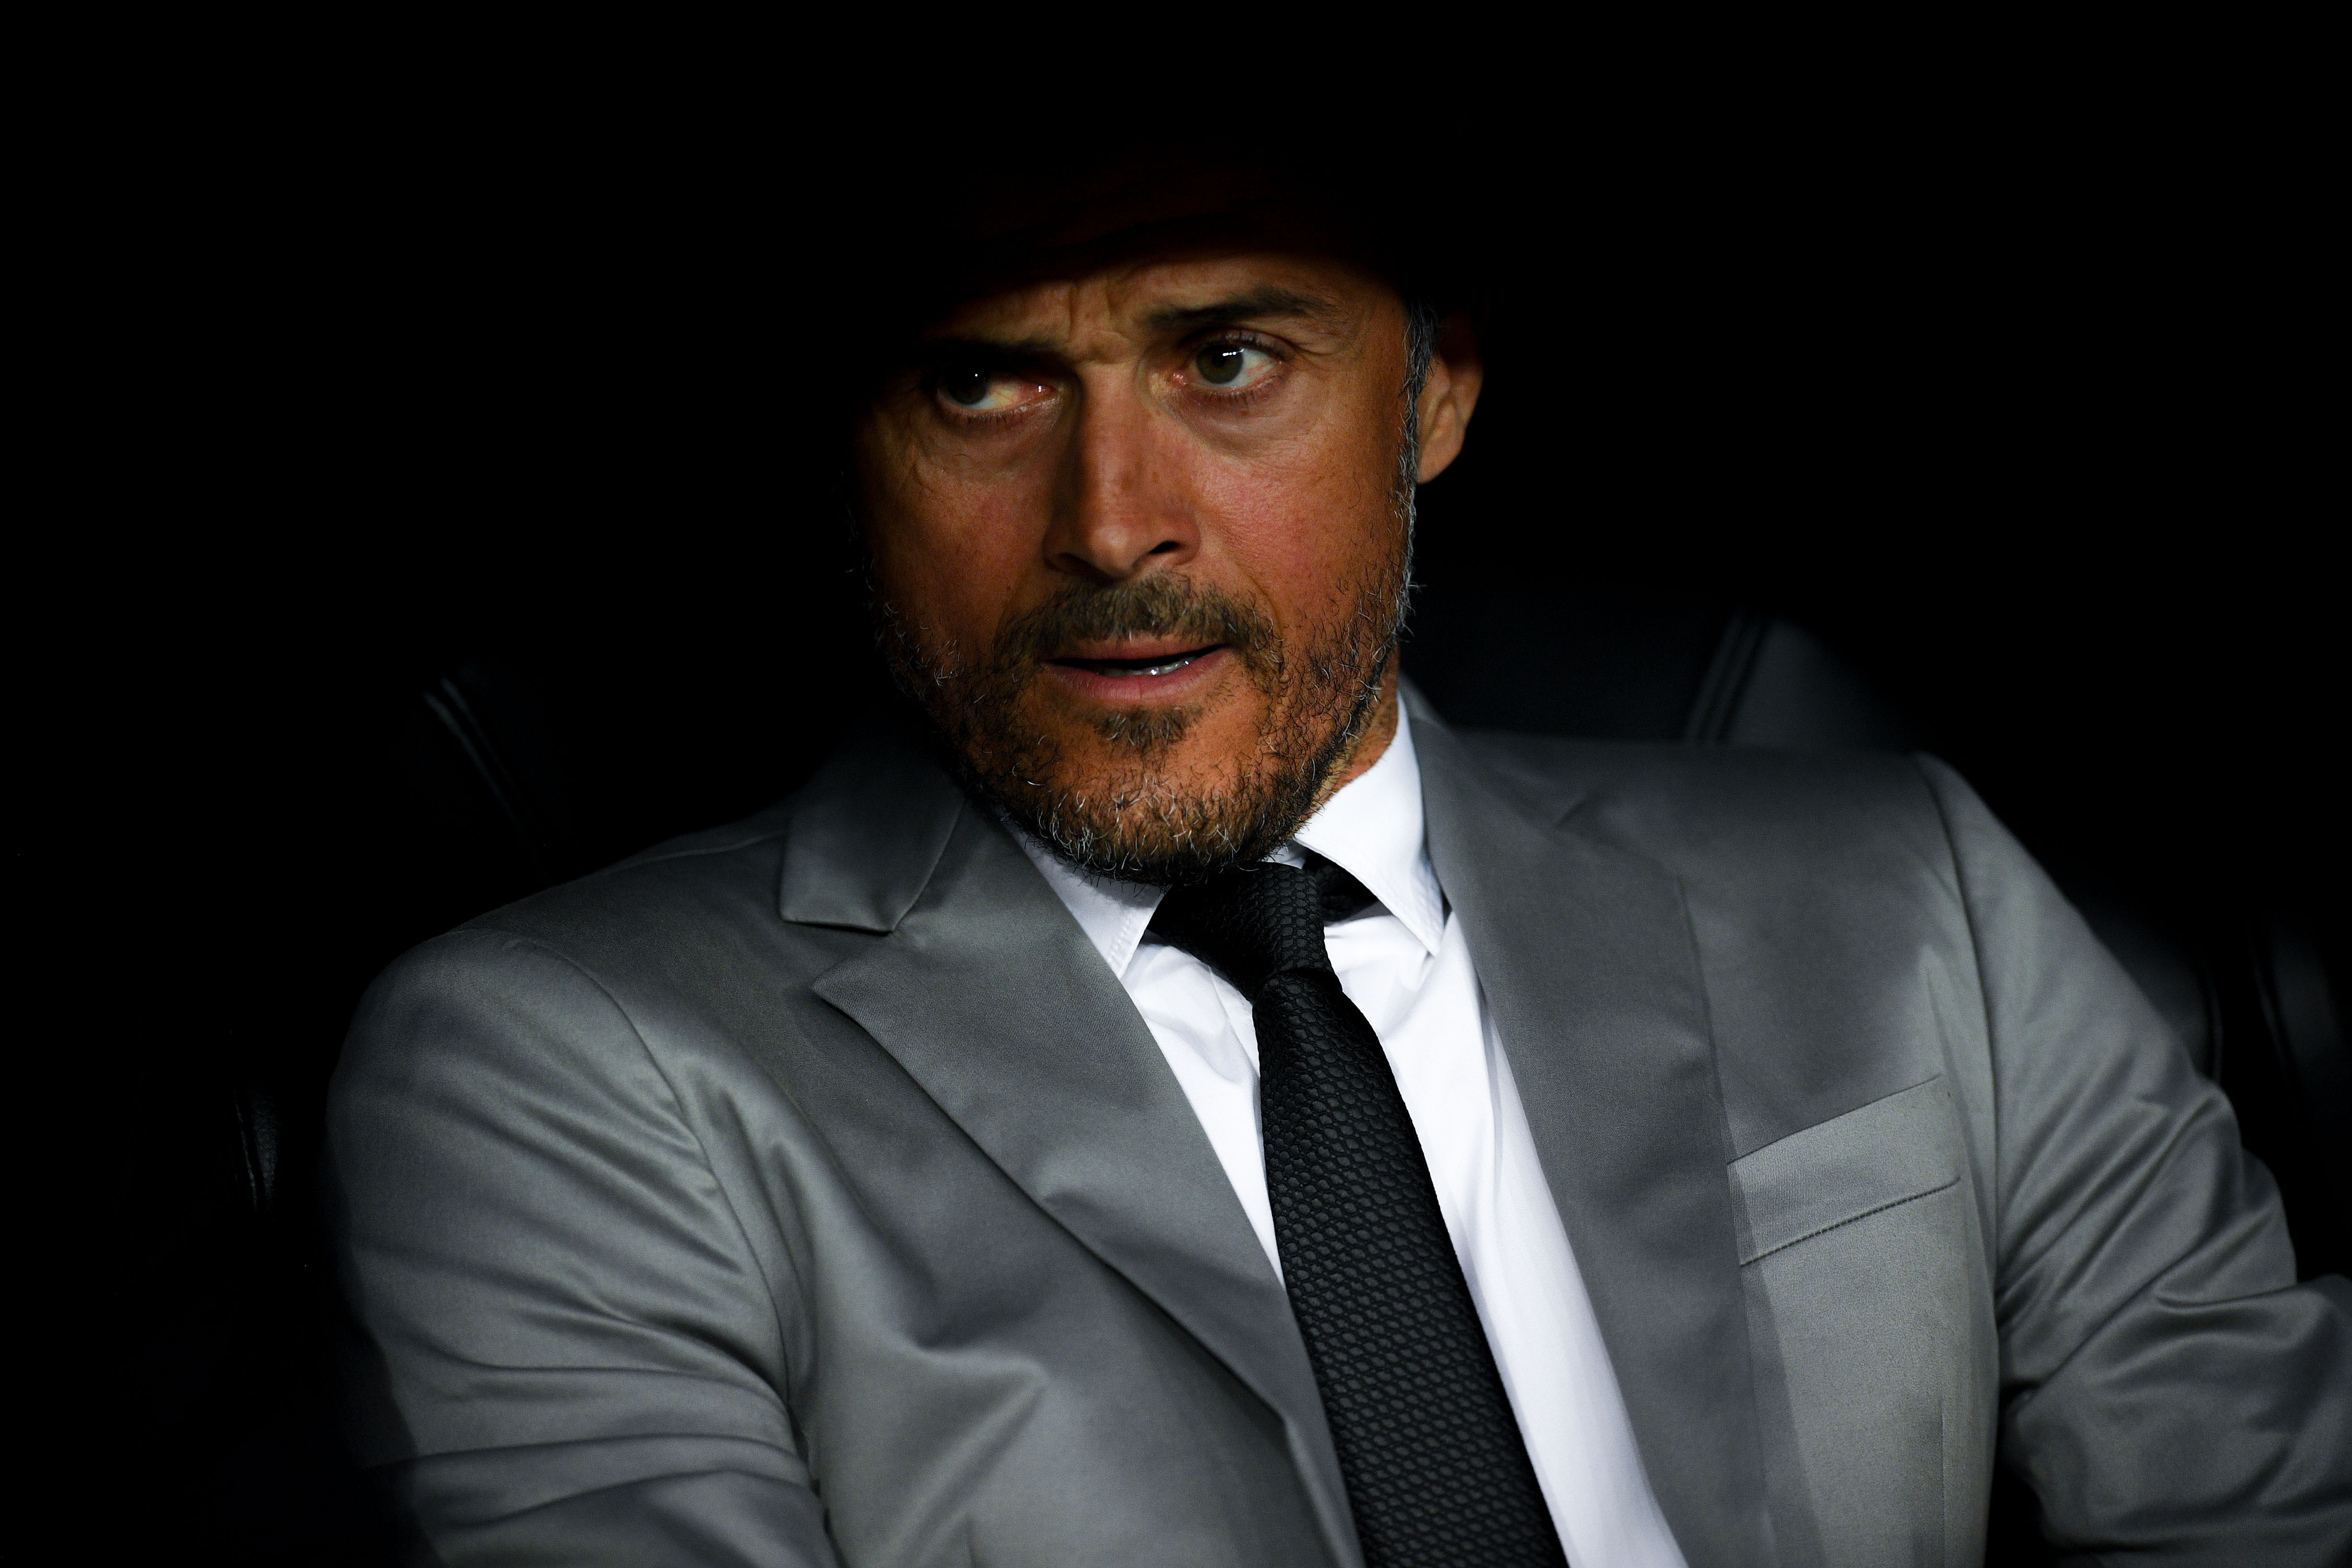 MADRID, SPAIN - APRIL 23:  Head coach Luis Enrique of FC Barcelona looks on during the La Liga match between Real Madrid CF and FC Barcelona at the Santiago Bernabeu stadium on April 23, 2017 in Madrid, Spain.  (Photo by David Ramos/Getty Images)